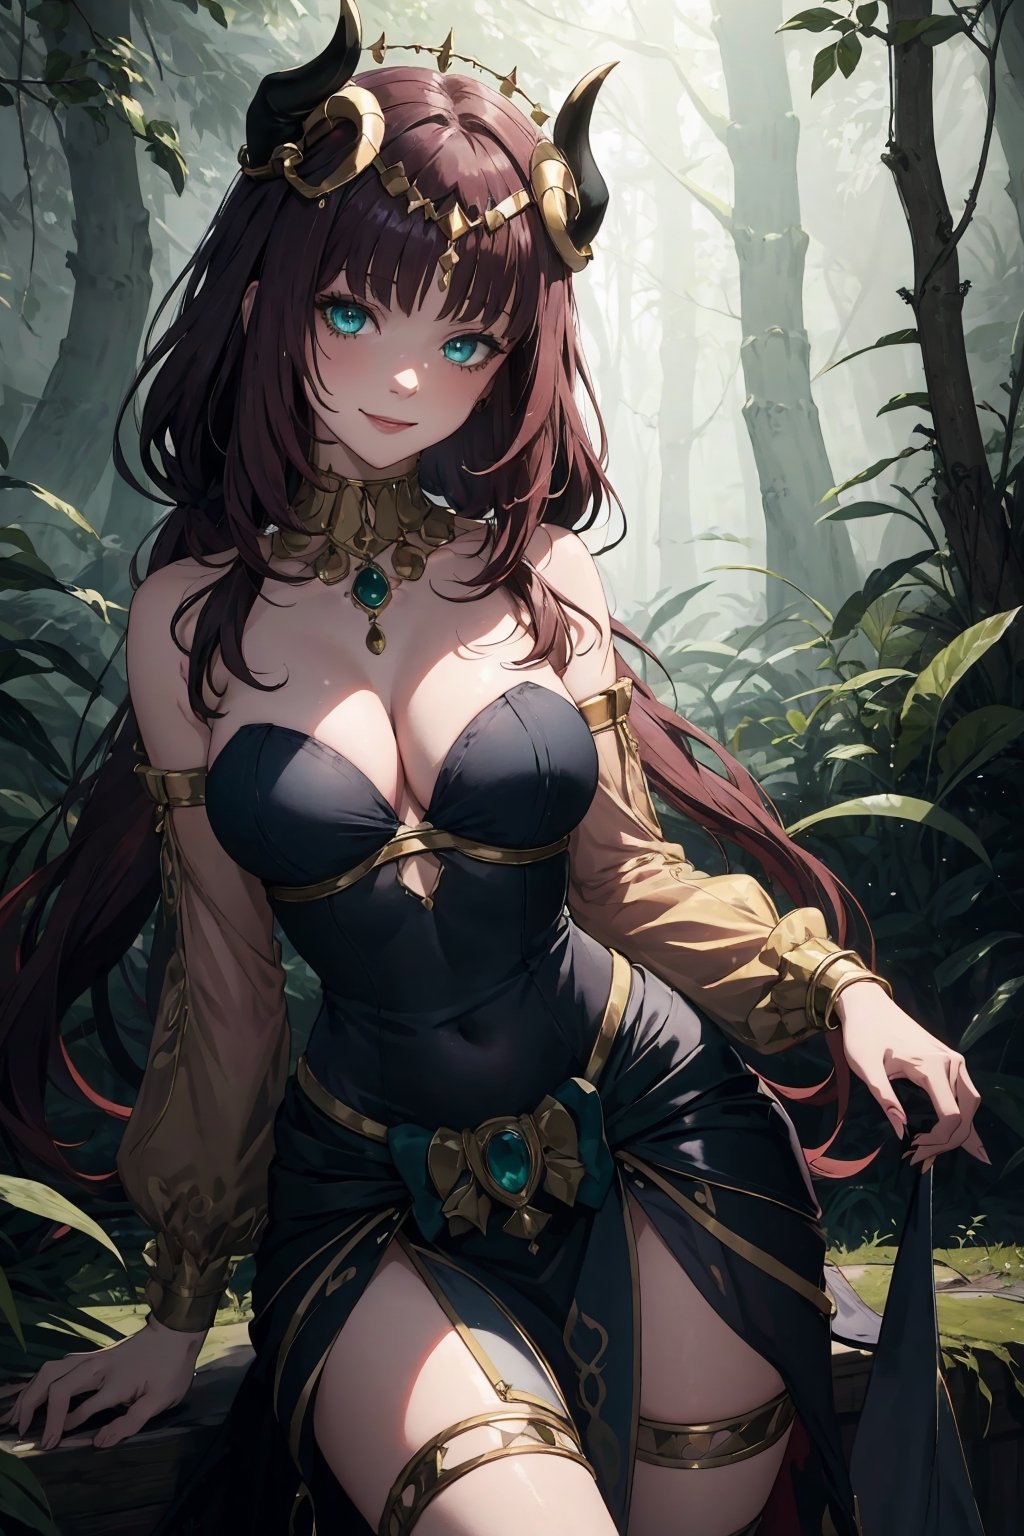 Imagine a beautiful woman with long and wild dark purple hair hair flowing freely around her. She has horns. Her dragon eyes are bright green, sparkling with intricate detail. She smiles like she is scheming something. She wears a gorgeous dress with a fine touch and she wears fine jewelery. The background is a creepy forest with dim lighting, creating an ominous ambiance. She is surrounded by sparking magic. This artwork captures a creepy atmosphere against the backdrop of a beautiful yet dimly lit setting, detailed, detail_eyes, detailed_hair, detailed_scenario, detailed_hands, detailed_background. girl, fine clothing, nilou horns, ,niloudef,Dreamwave,tharja_(fire_emblem)